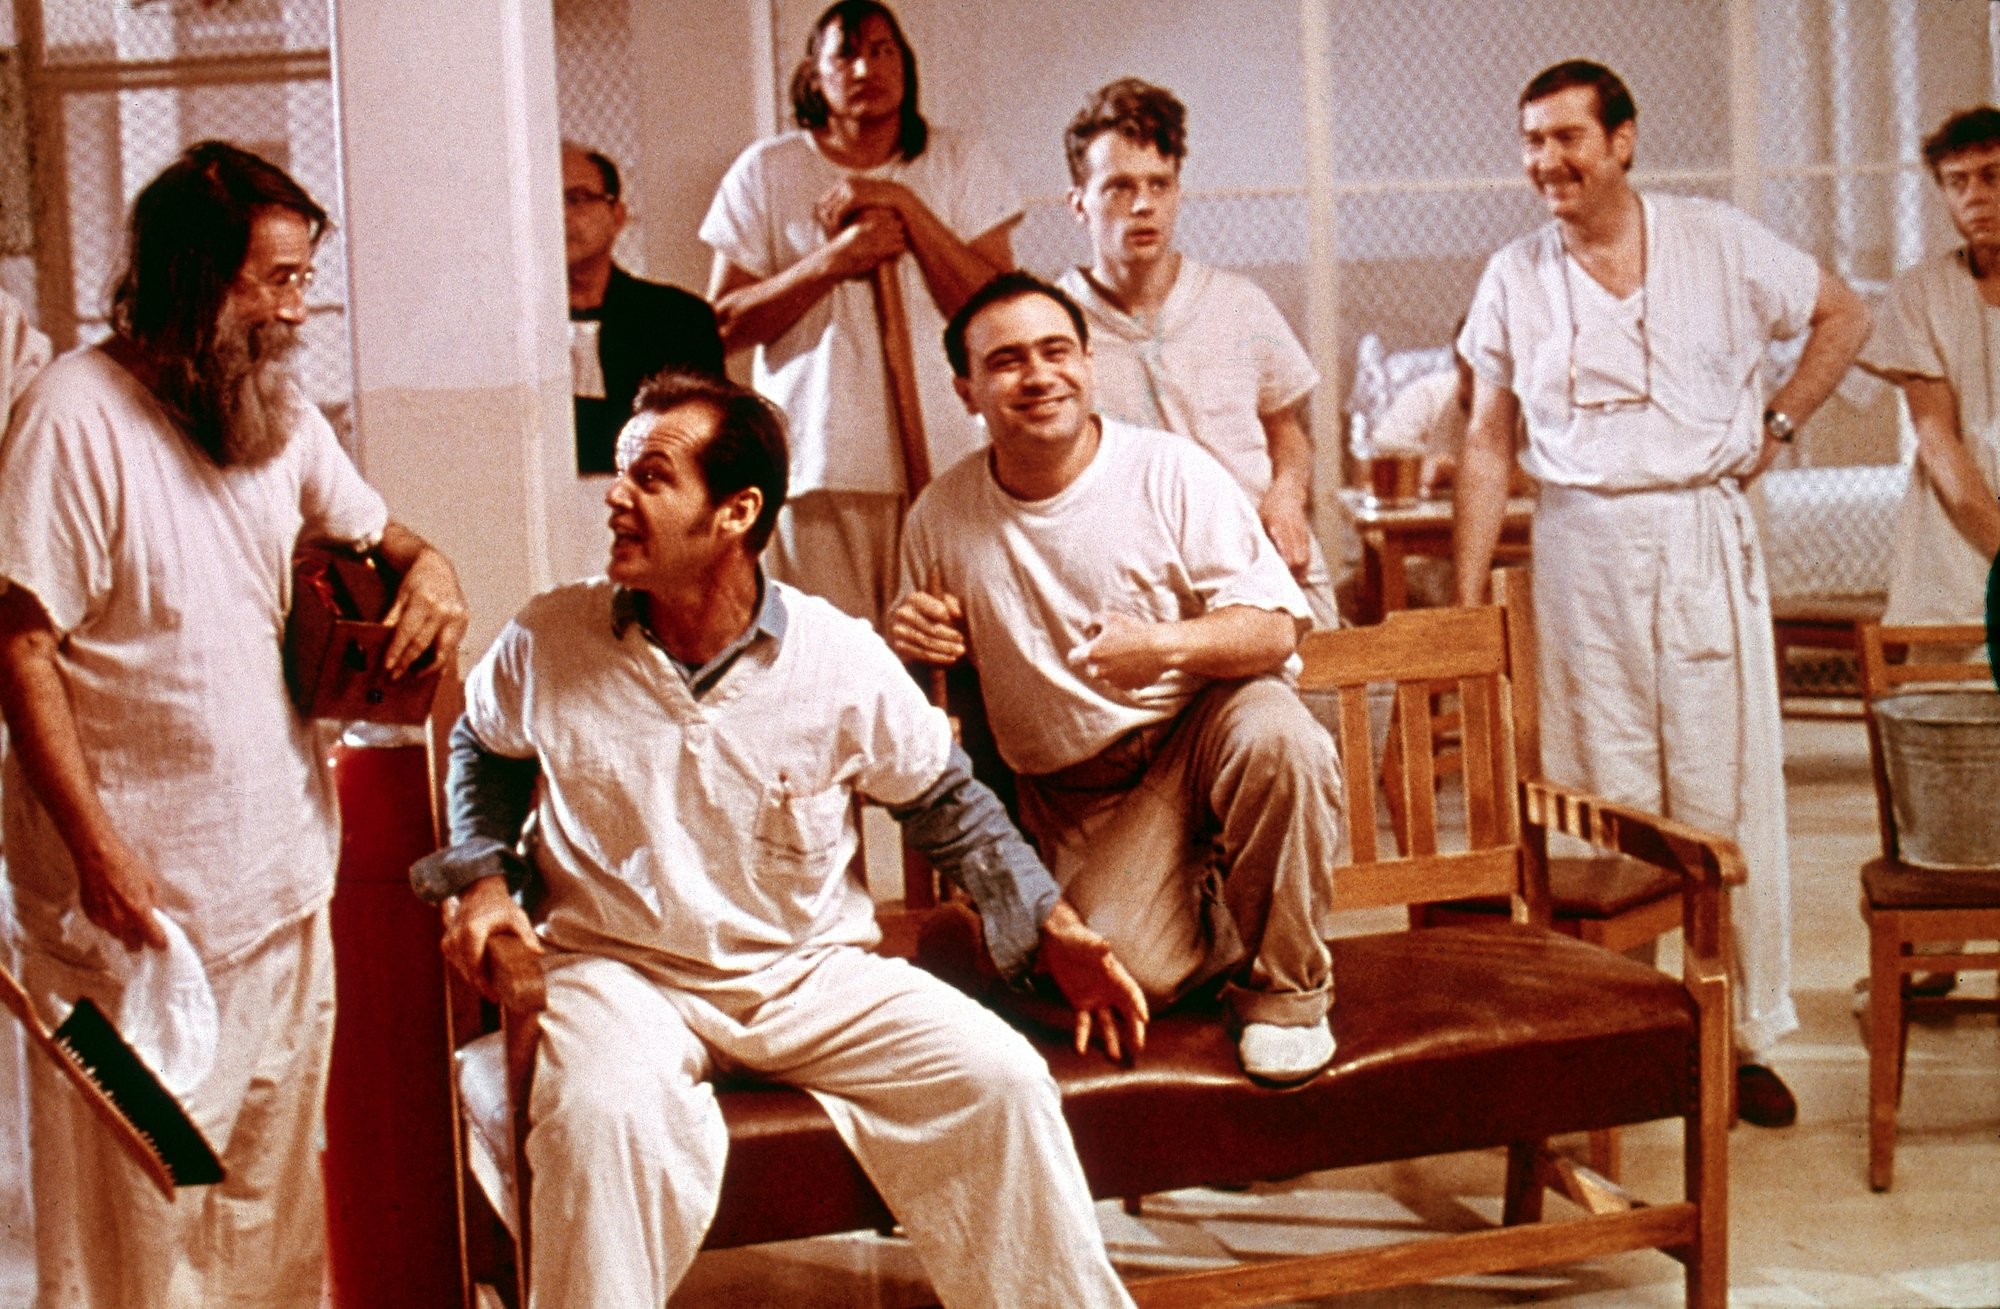 A scene from 'One Flew Over the Cuckoo's Nest' where the cast sits around a common room